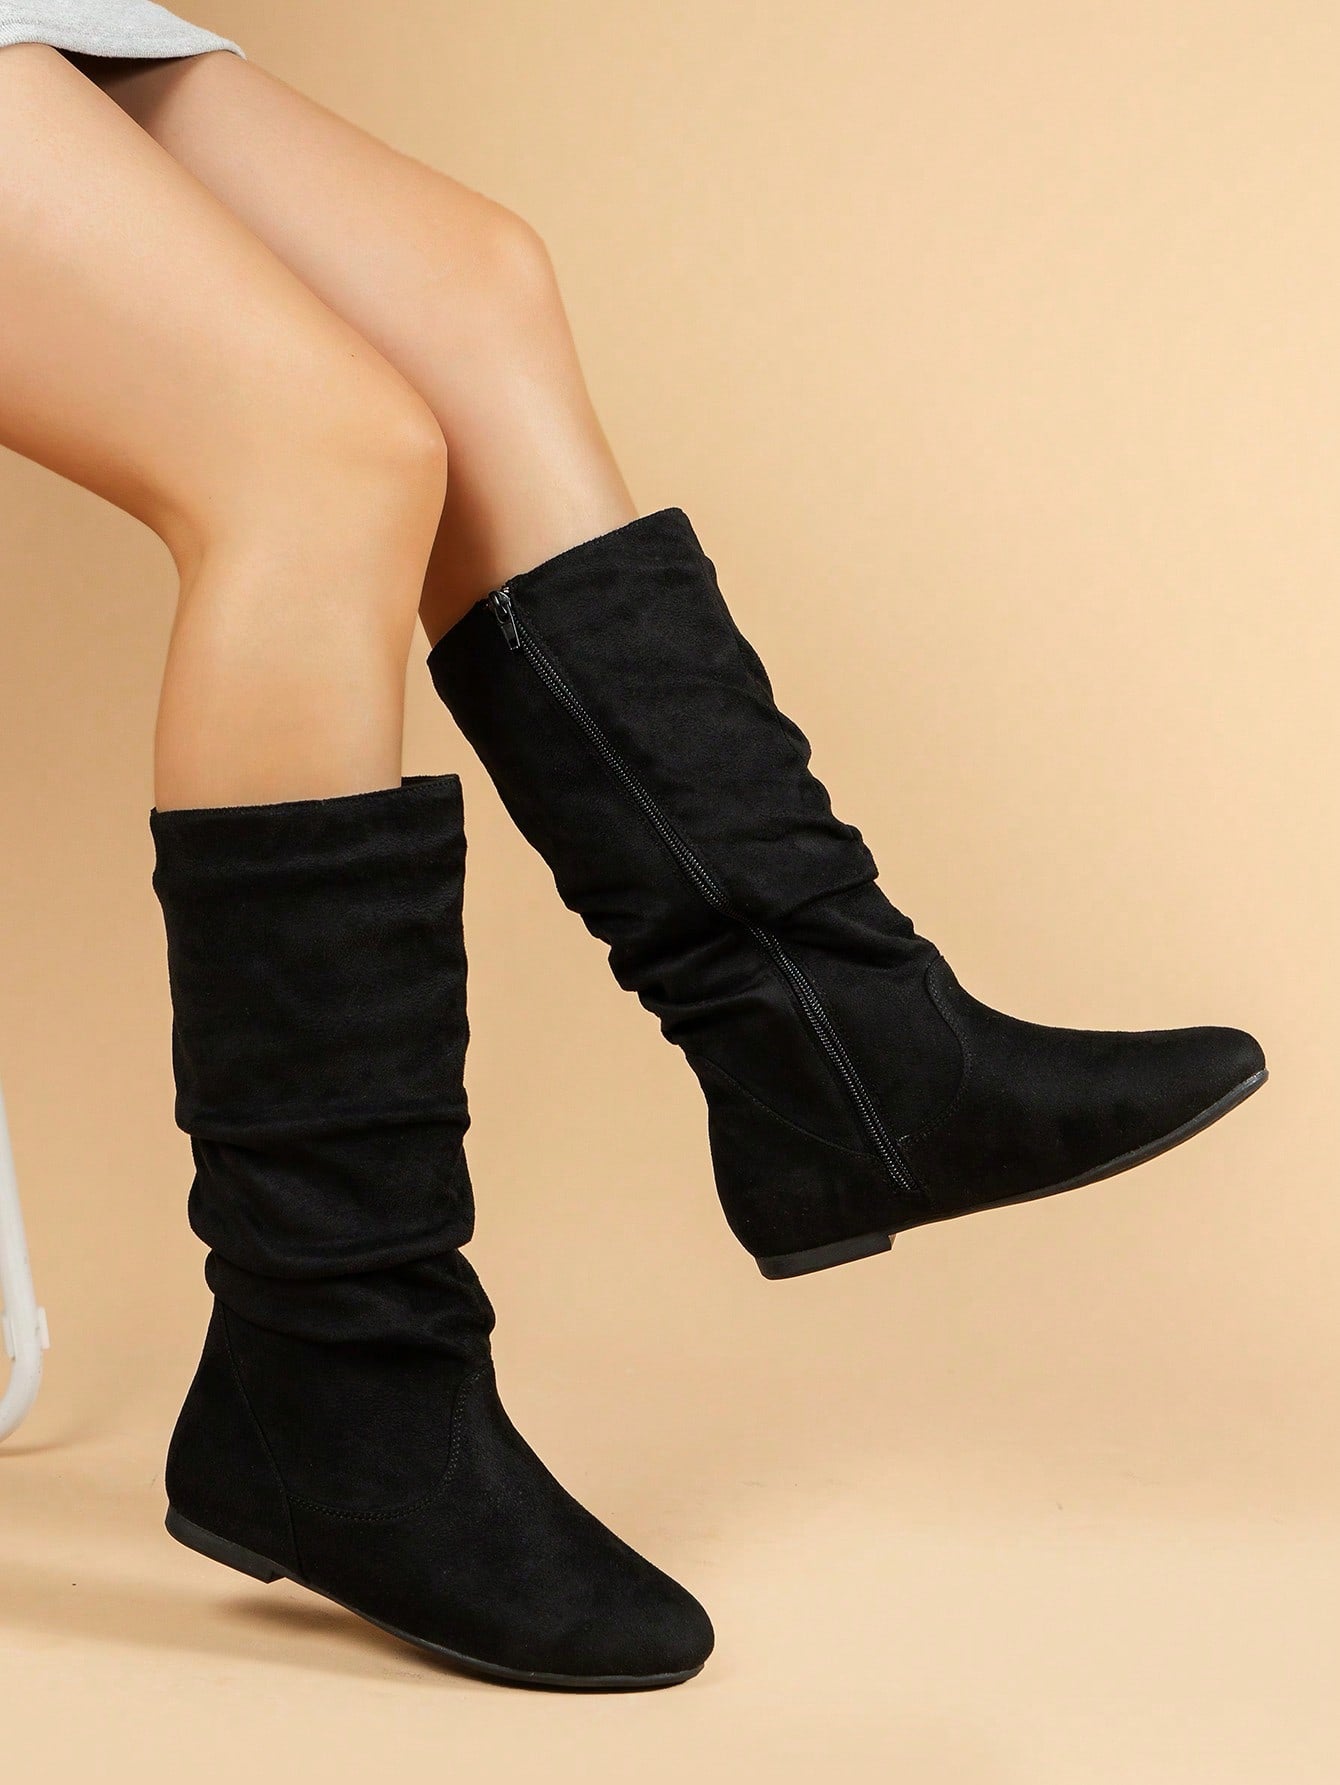 Pink Casual And Comfortable Side Zipper Round Toe Camel Pleated Fashionable Flat Women's Boots